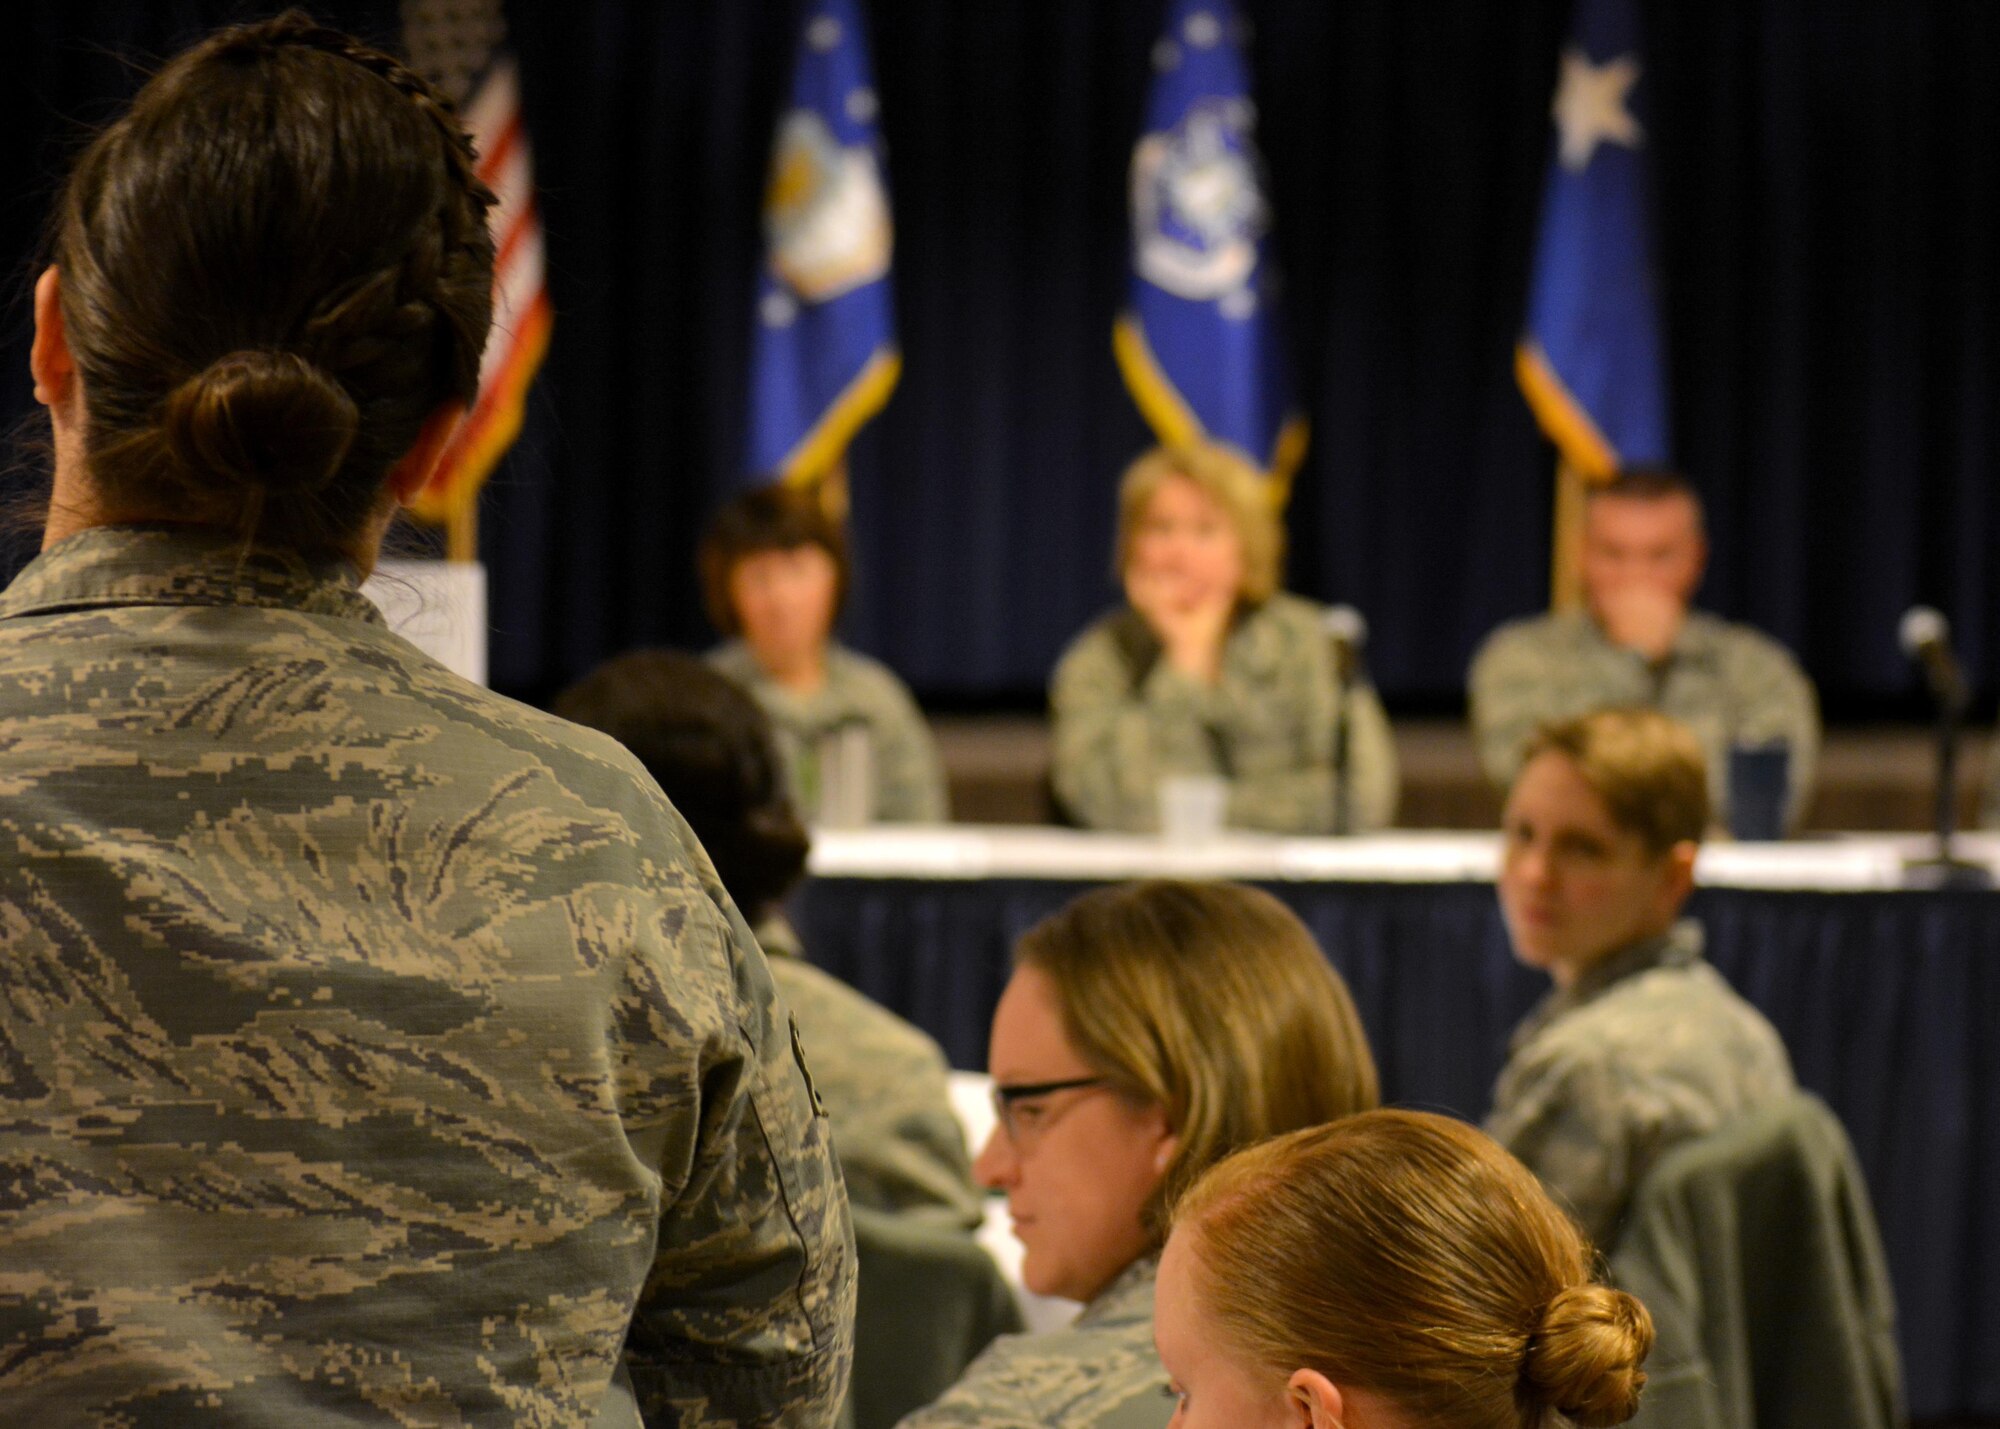 PETERSON AIR FORCE BASE, Colo. -- Airmen attending the Women's Leadership Symposium at the Peterson Club on Tuesday, Mar. 7th, 2017, participate in an active panel discussion with Air Force leaders. Attendees came from a variety of bases, including Buckley, Peterson, Schriever, Vandenberg and Cheyenne Mountain. (U.S. Air Force photo/Senior Airman Laura Turner)